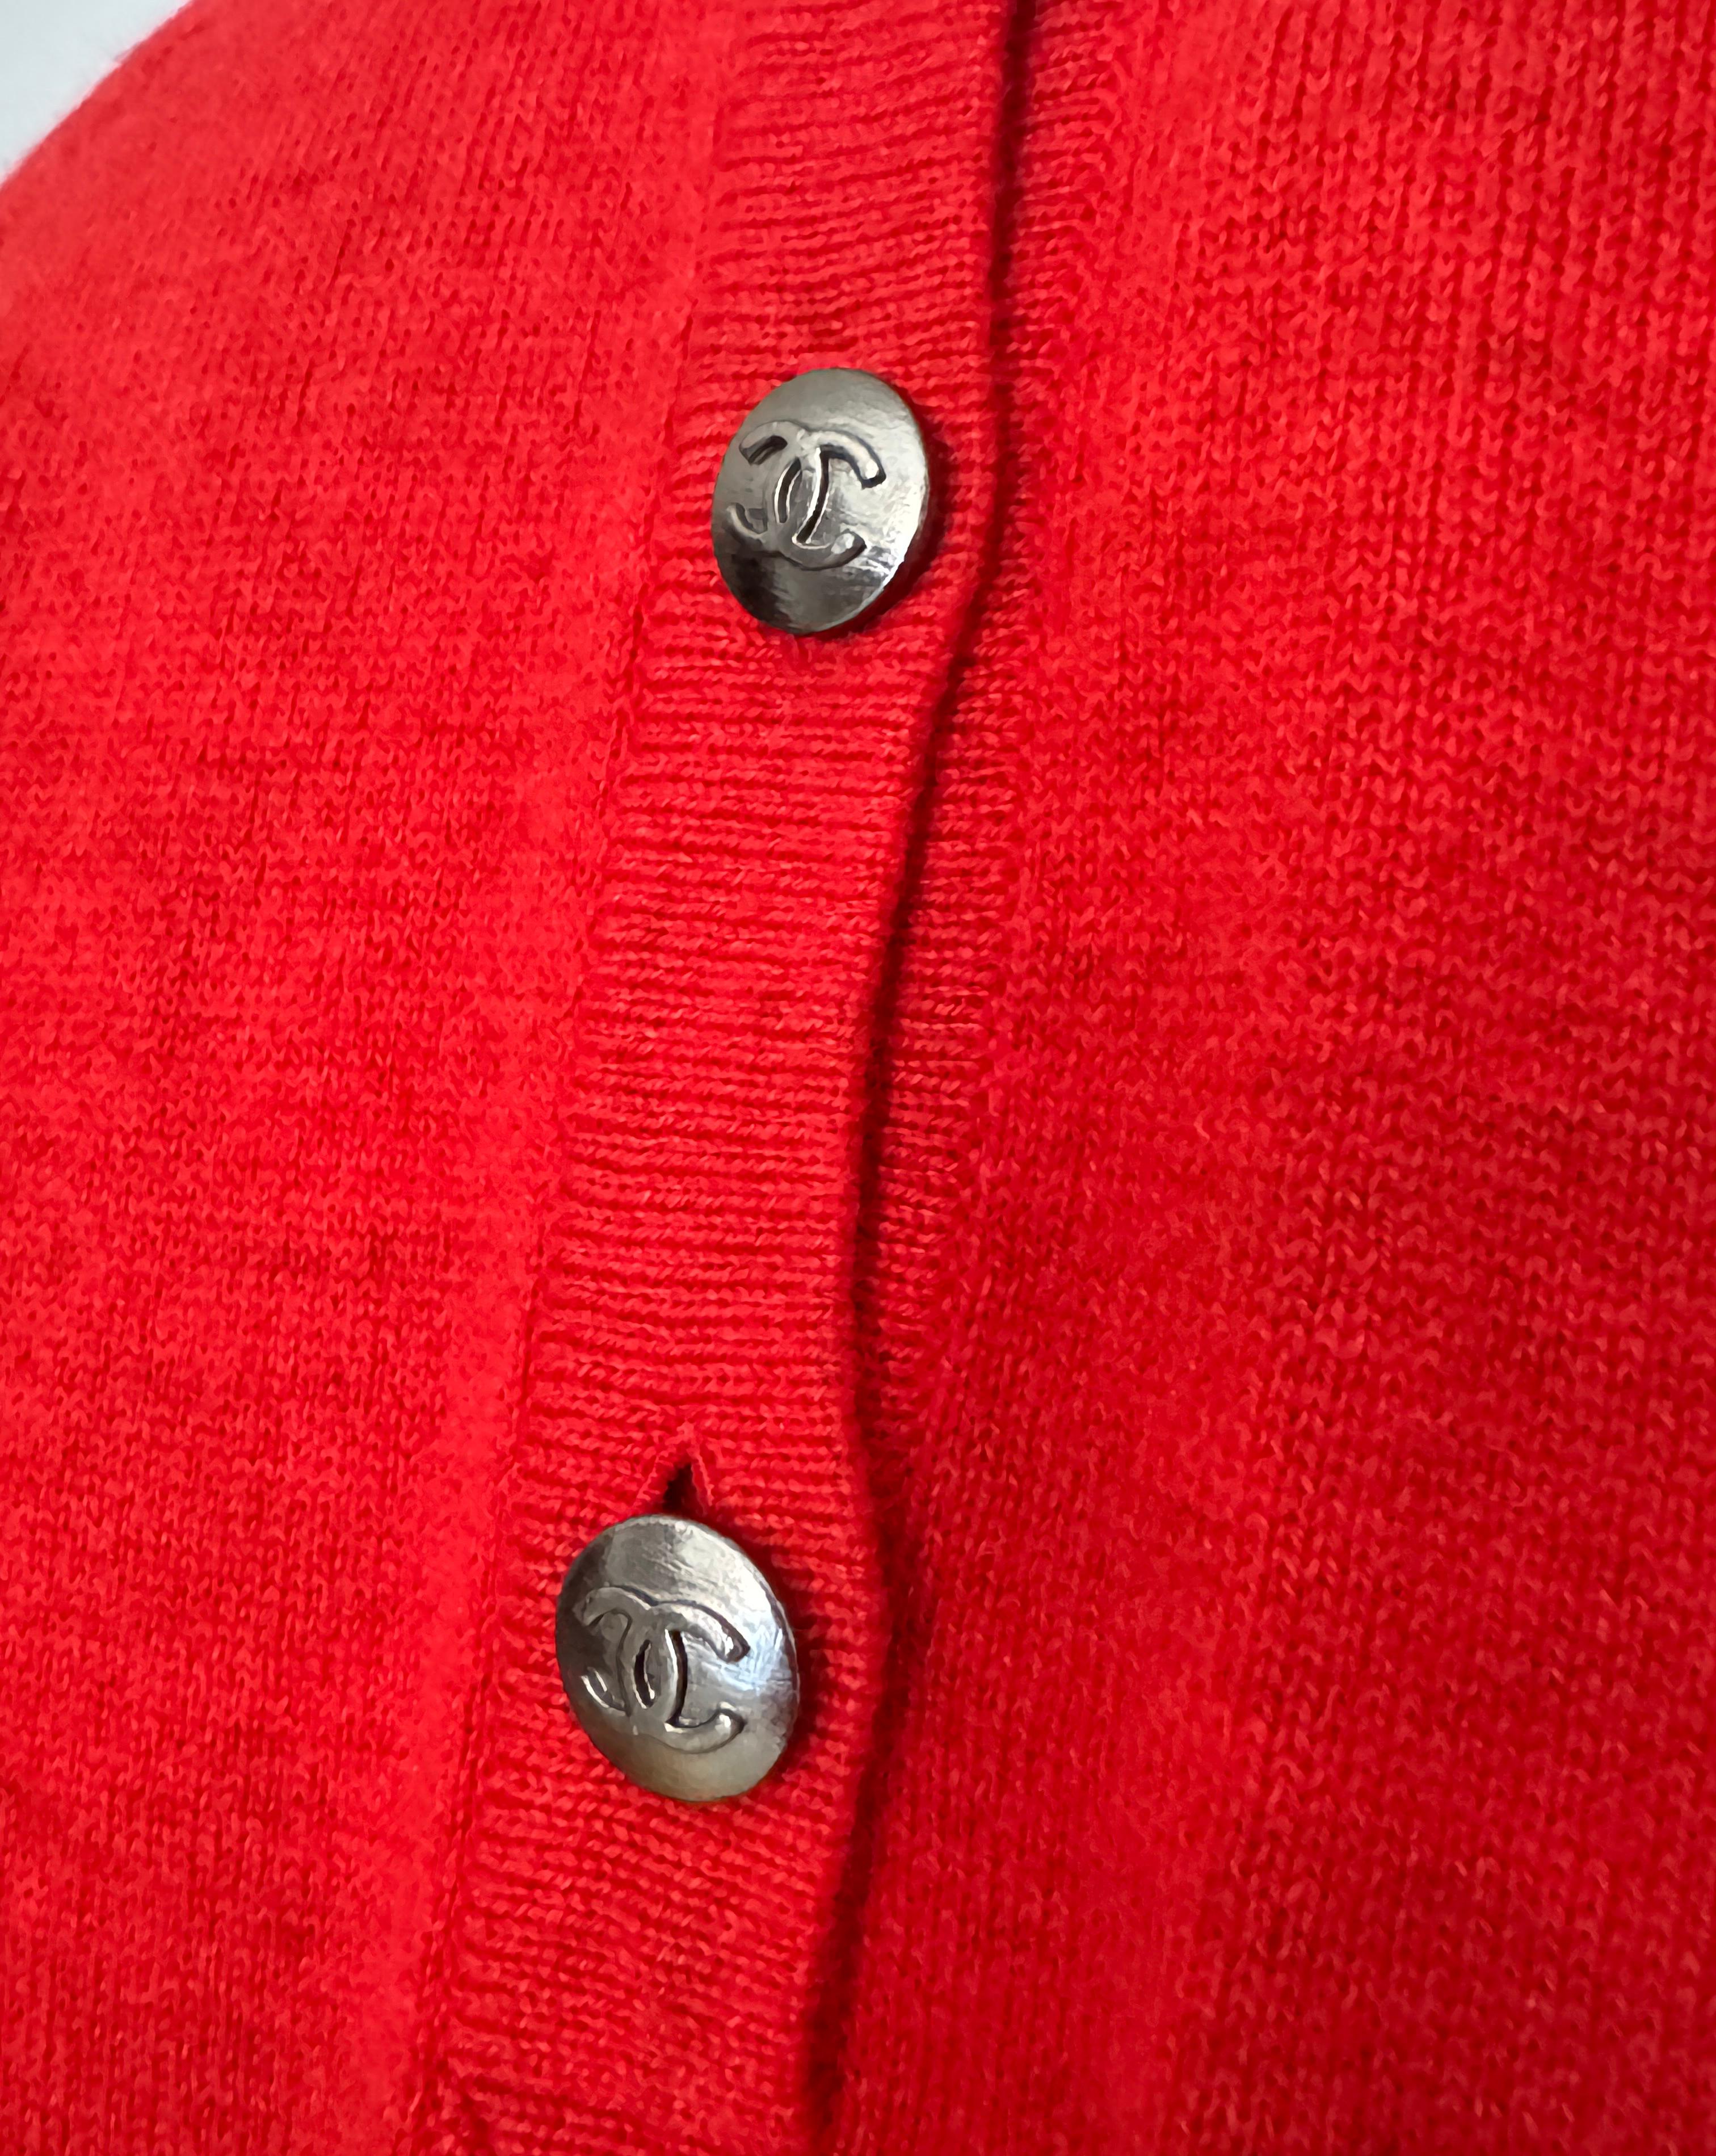 New Chanel coral cashmere jumper / dress with CC logo buttons.
Size mark 40 FR. Never worn.